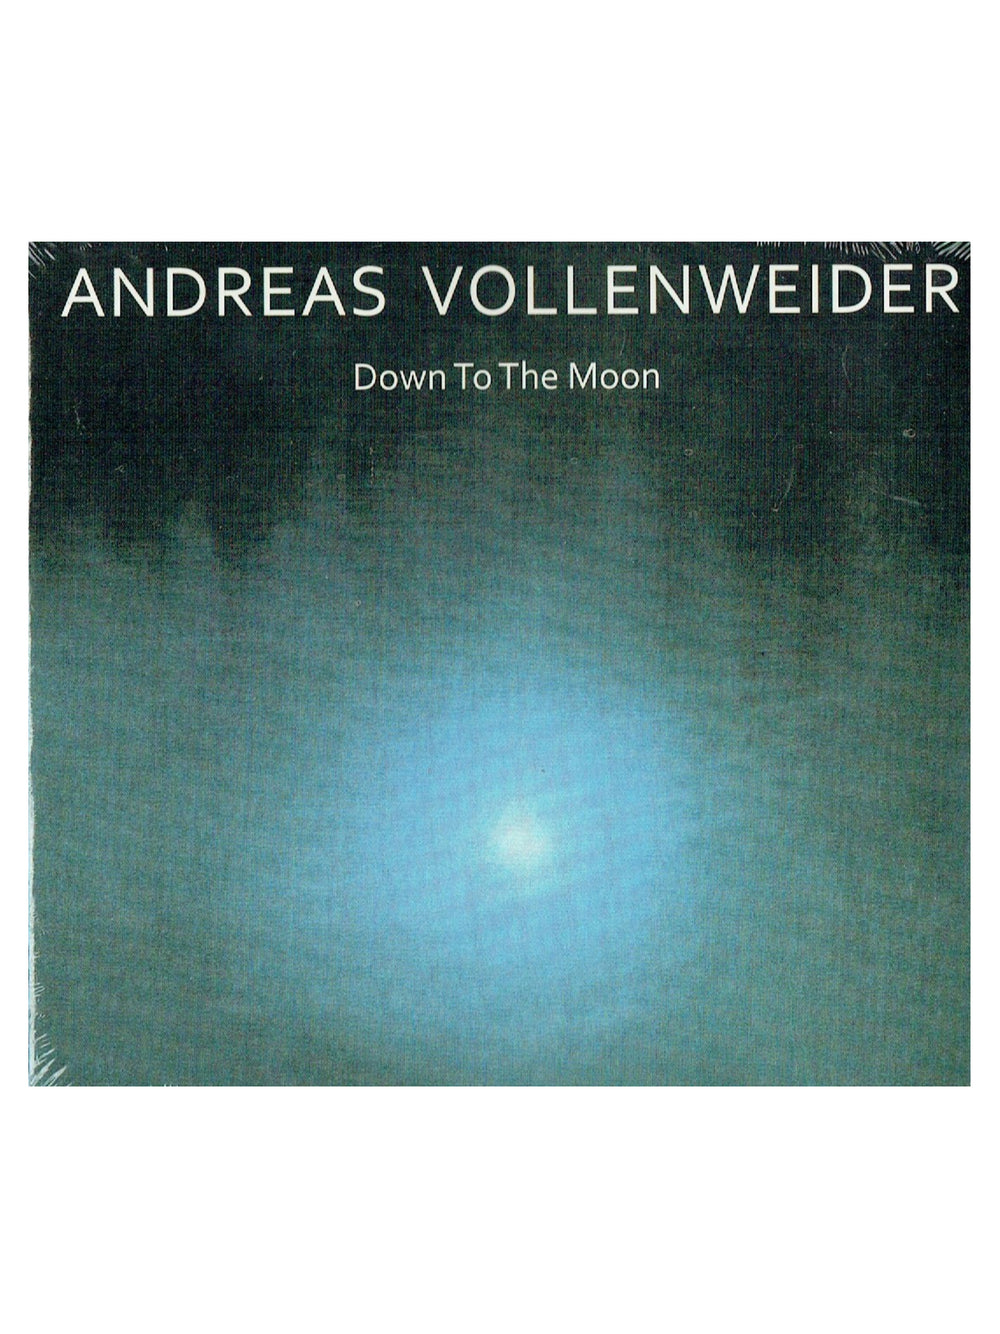 Prince – Andreas Vollenweider – Down To The Moon CD Album Europe NEW 2020